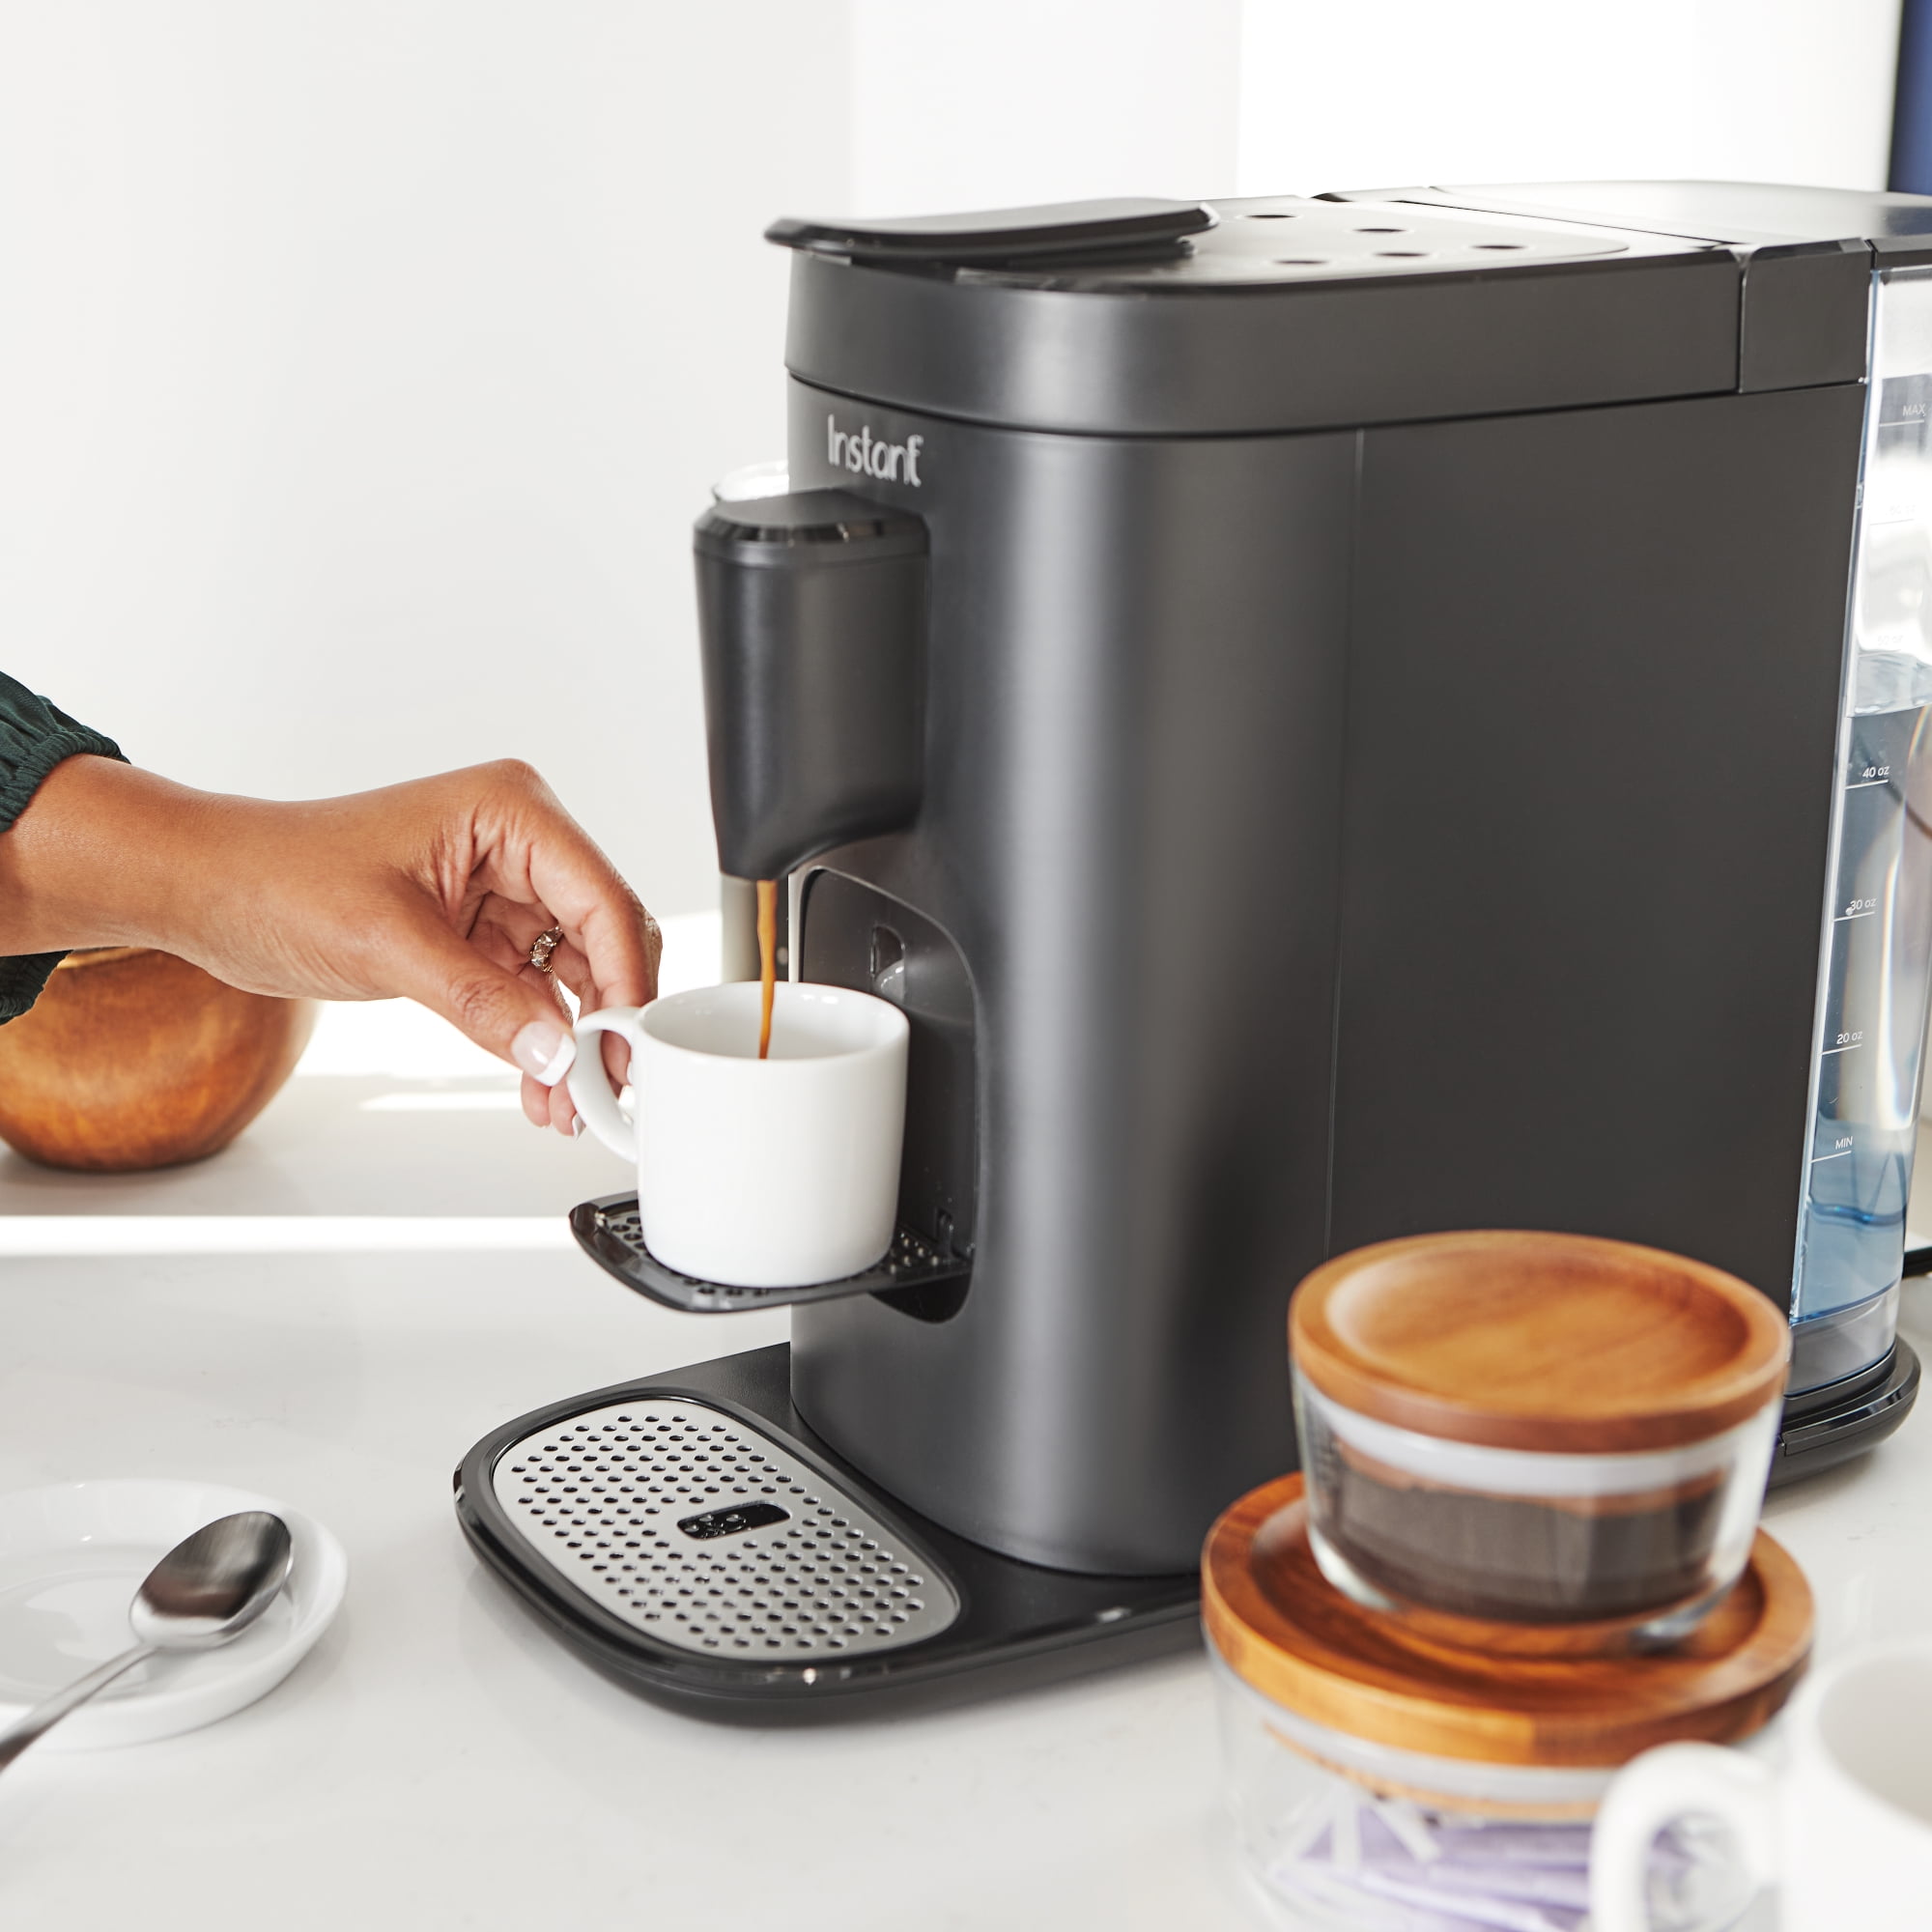 The Instant Pod makes quick K-Cup, Nespresso coffee the priority - CNET